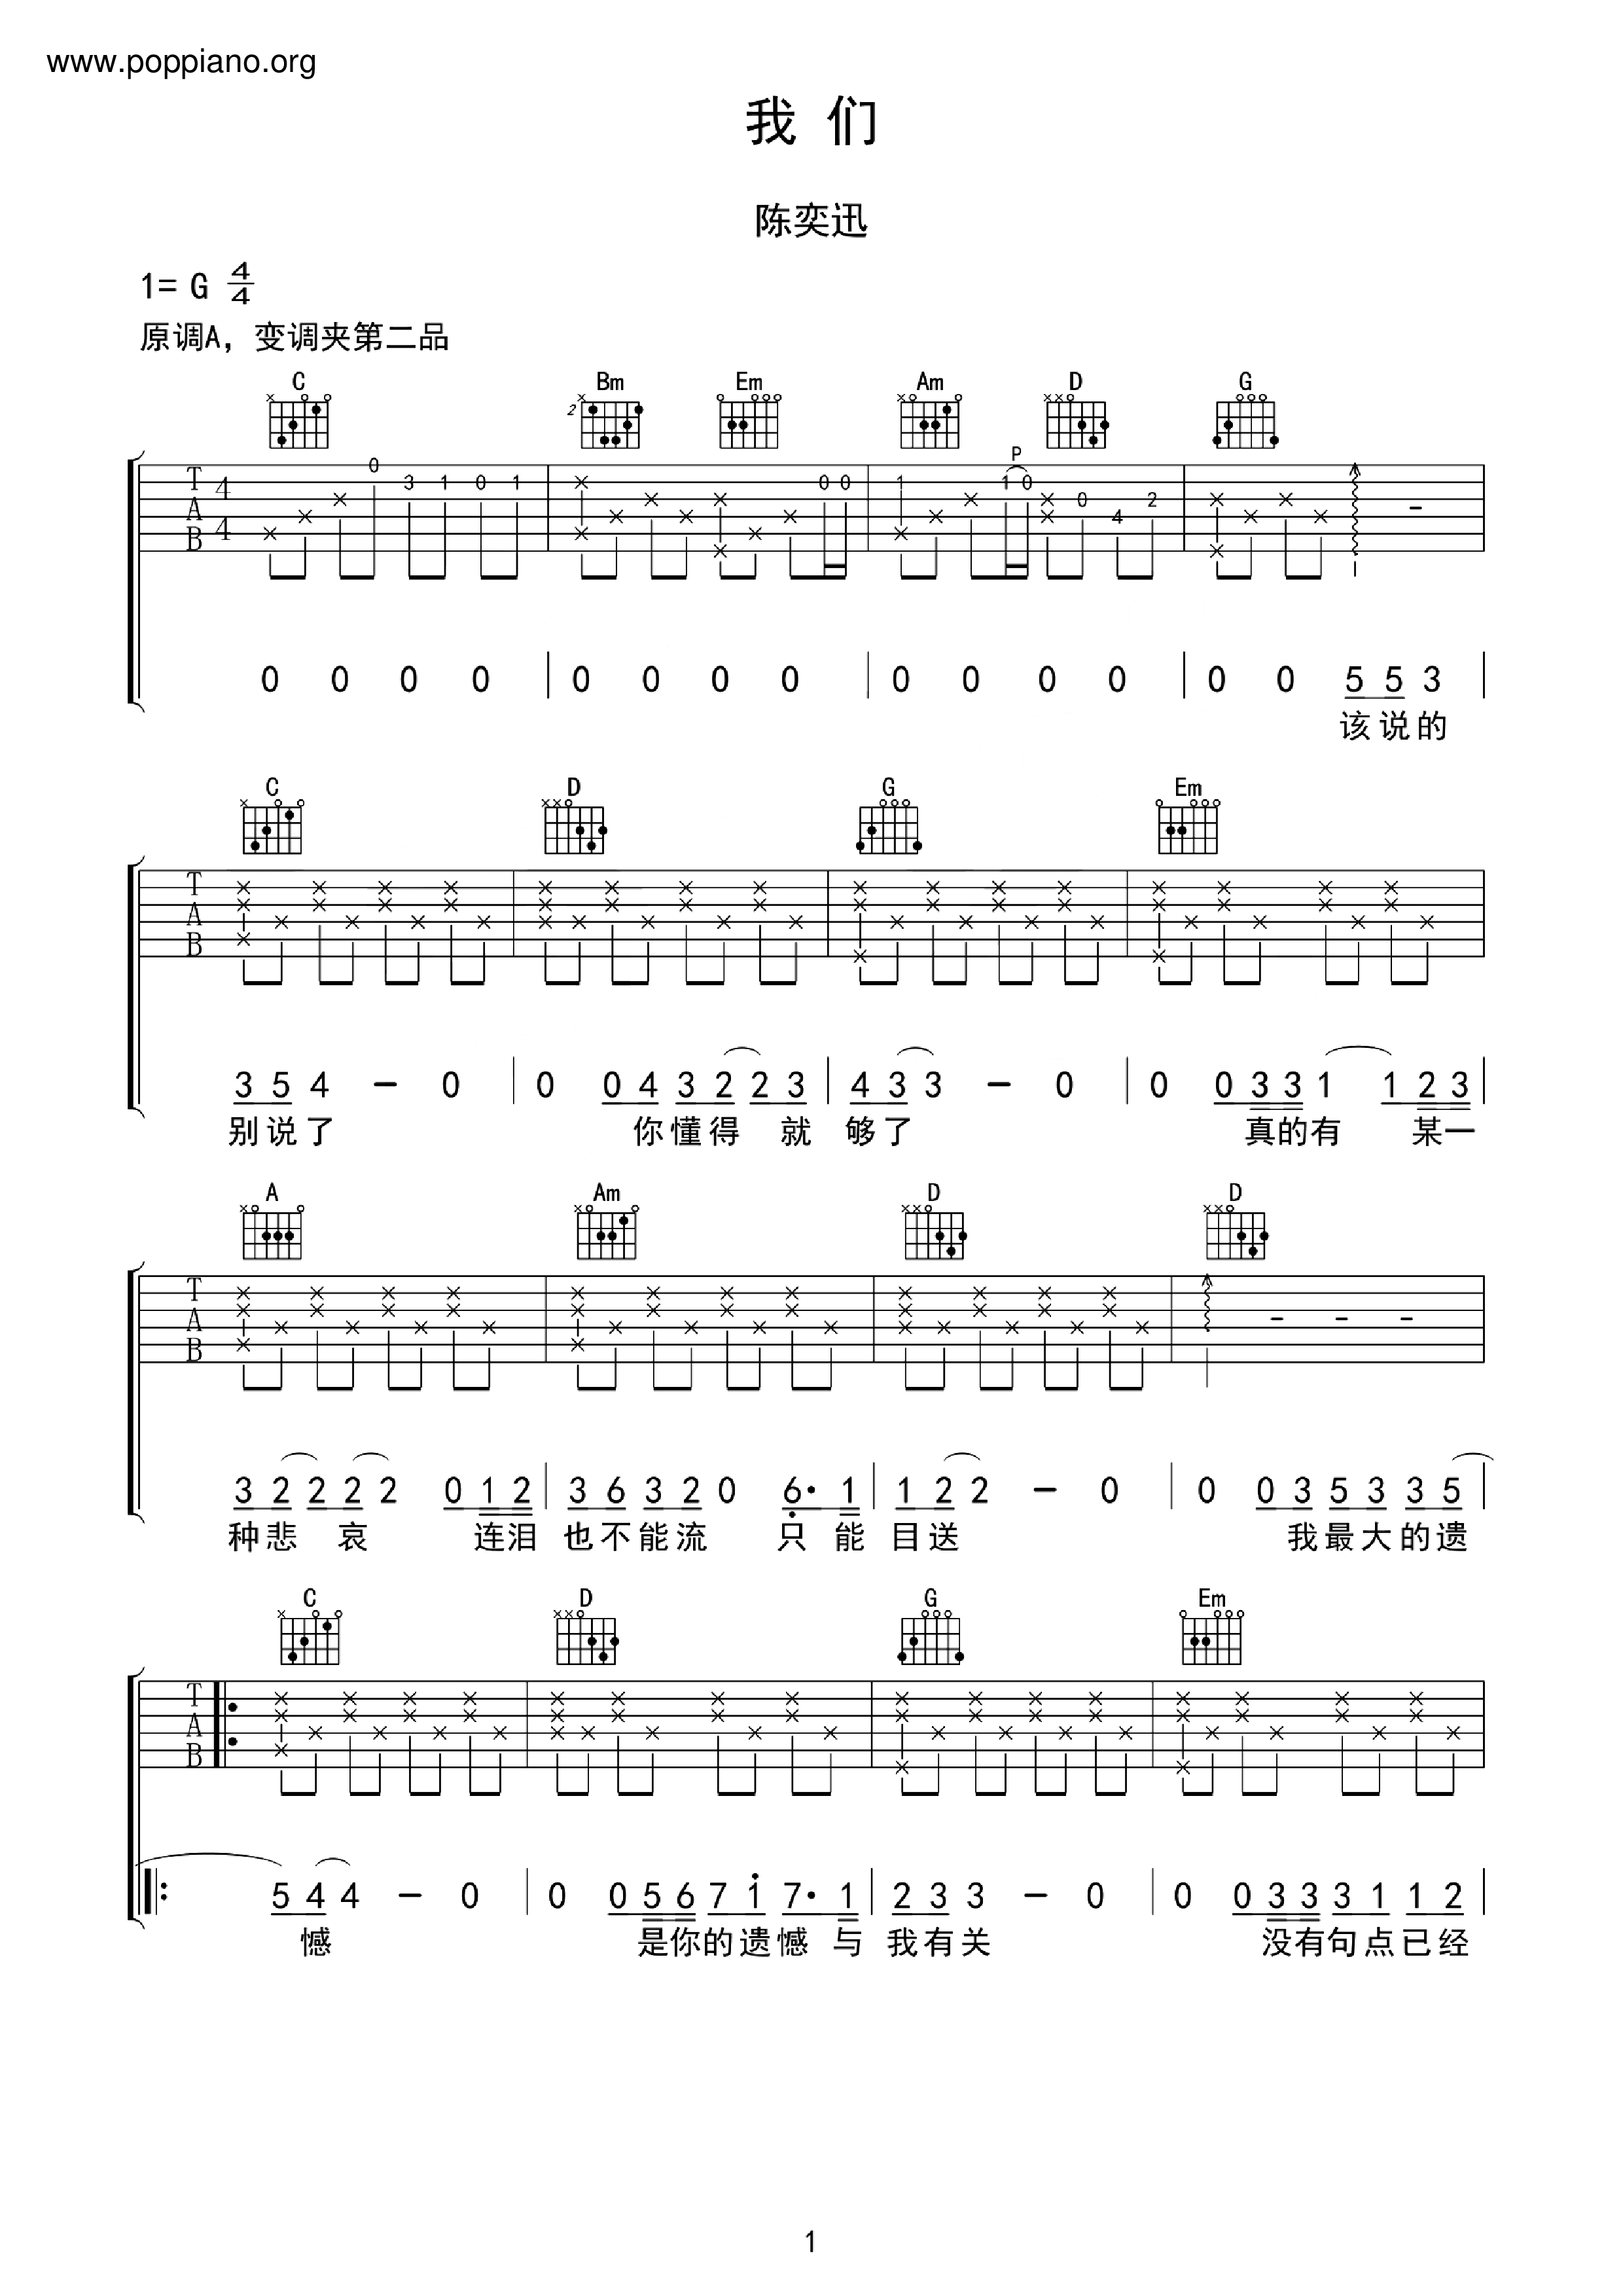 Us (The Theme Song Of The Movie "Later Us") Score